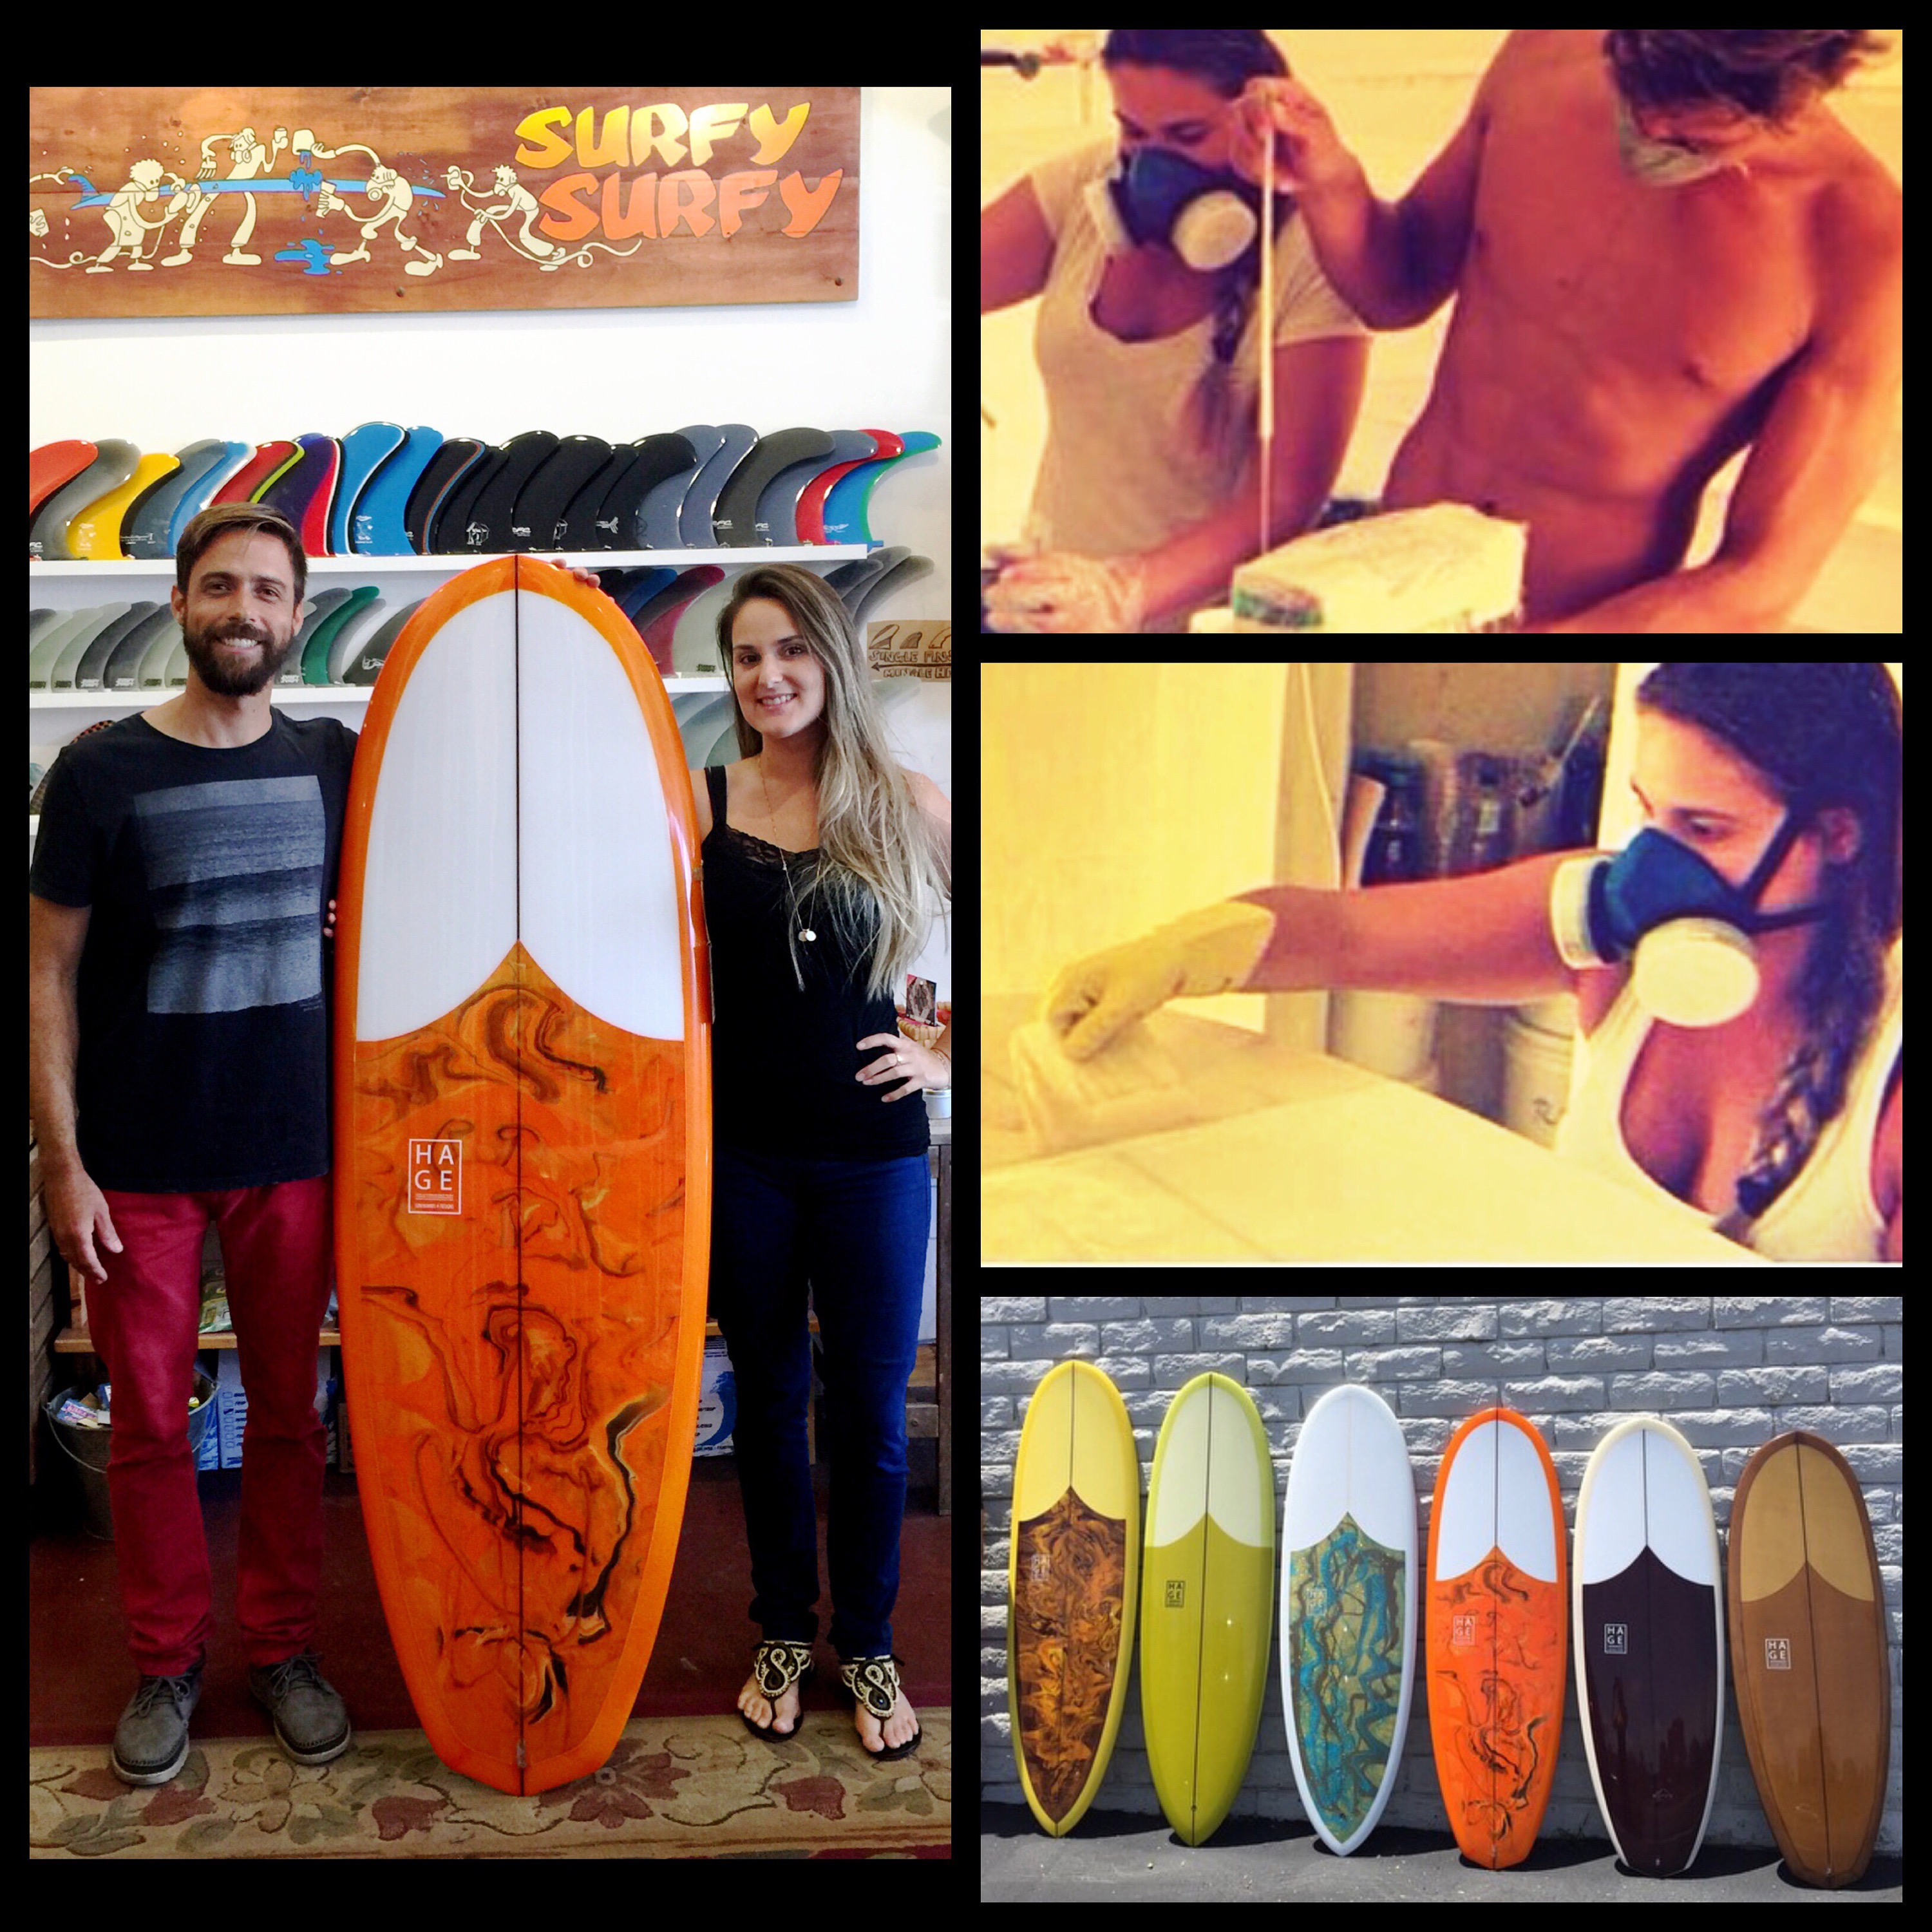 Hage Surfboards at Surfy 